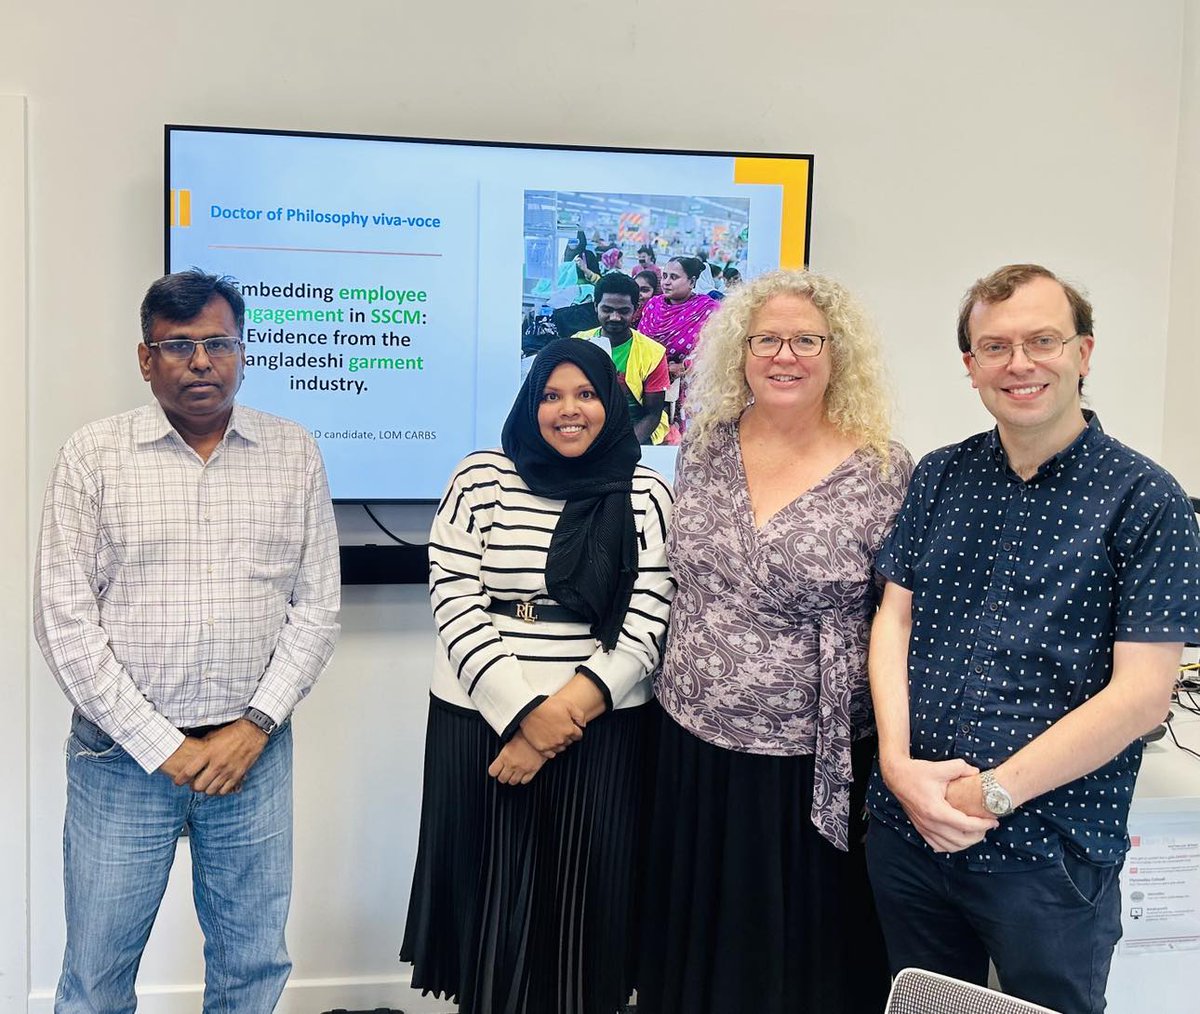 Here is a happy soul with her amazing examiners, having just passed her viva today. I am now officially Dr. Sharmin Julie (still feels a bit surreal!). I have a lot of people to thank, but for now a short thread: 1/2